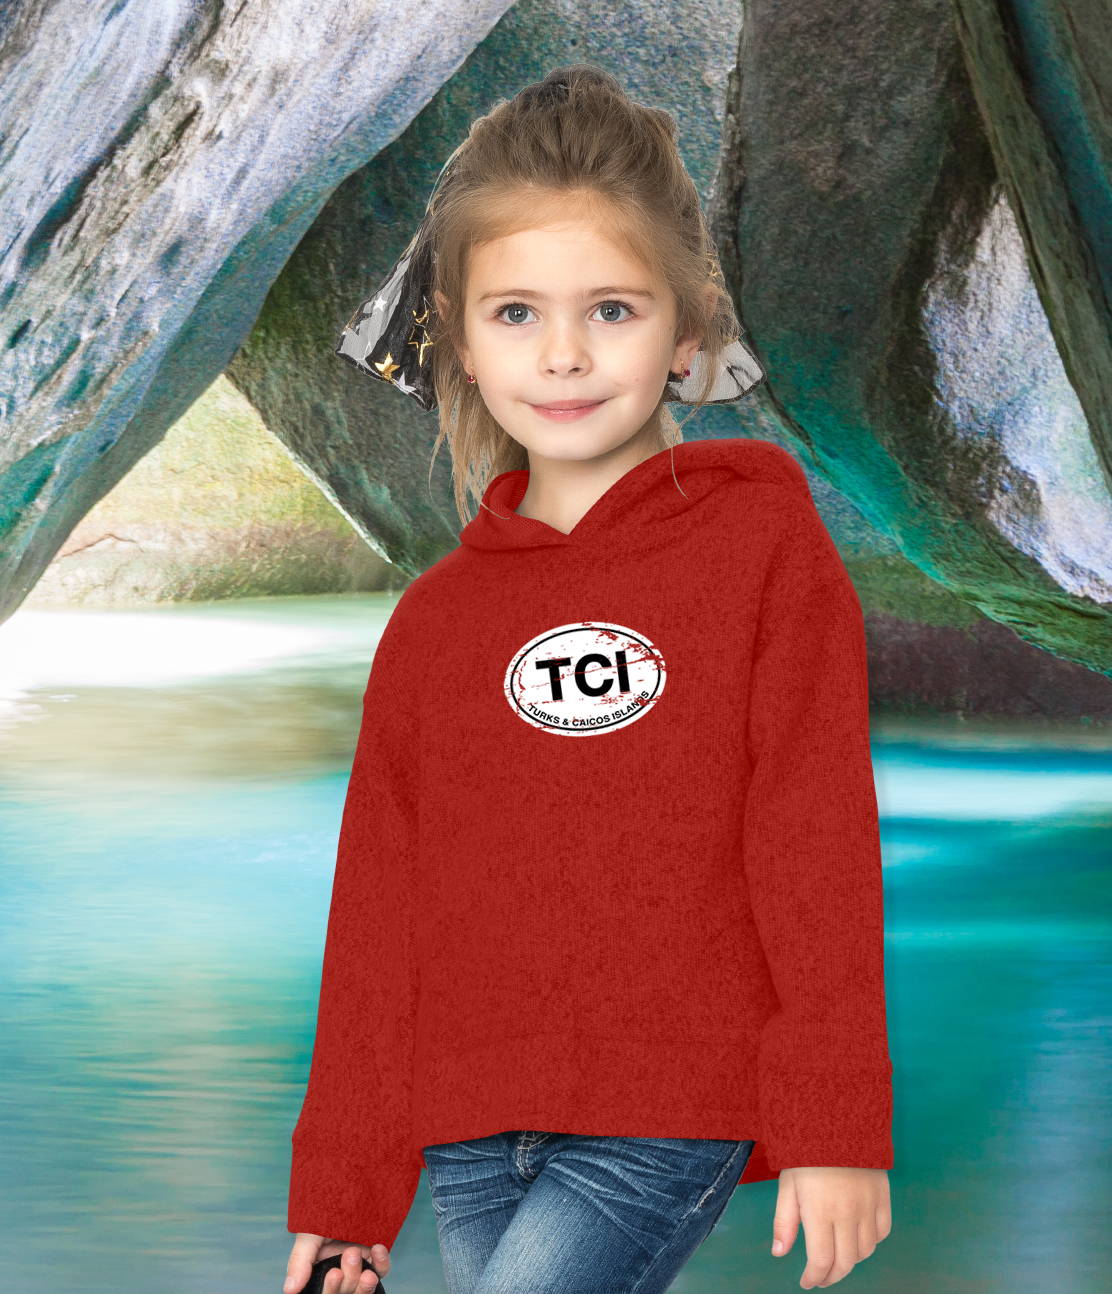 Turks & Caicos Classic Youth Hoodie - My Destination Location